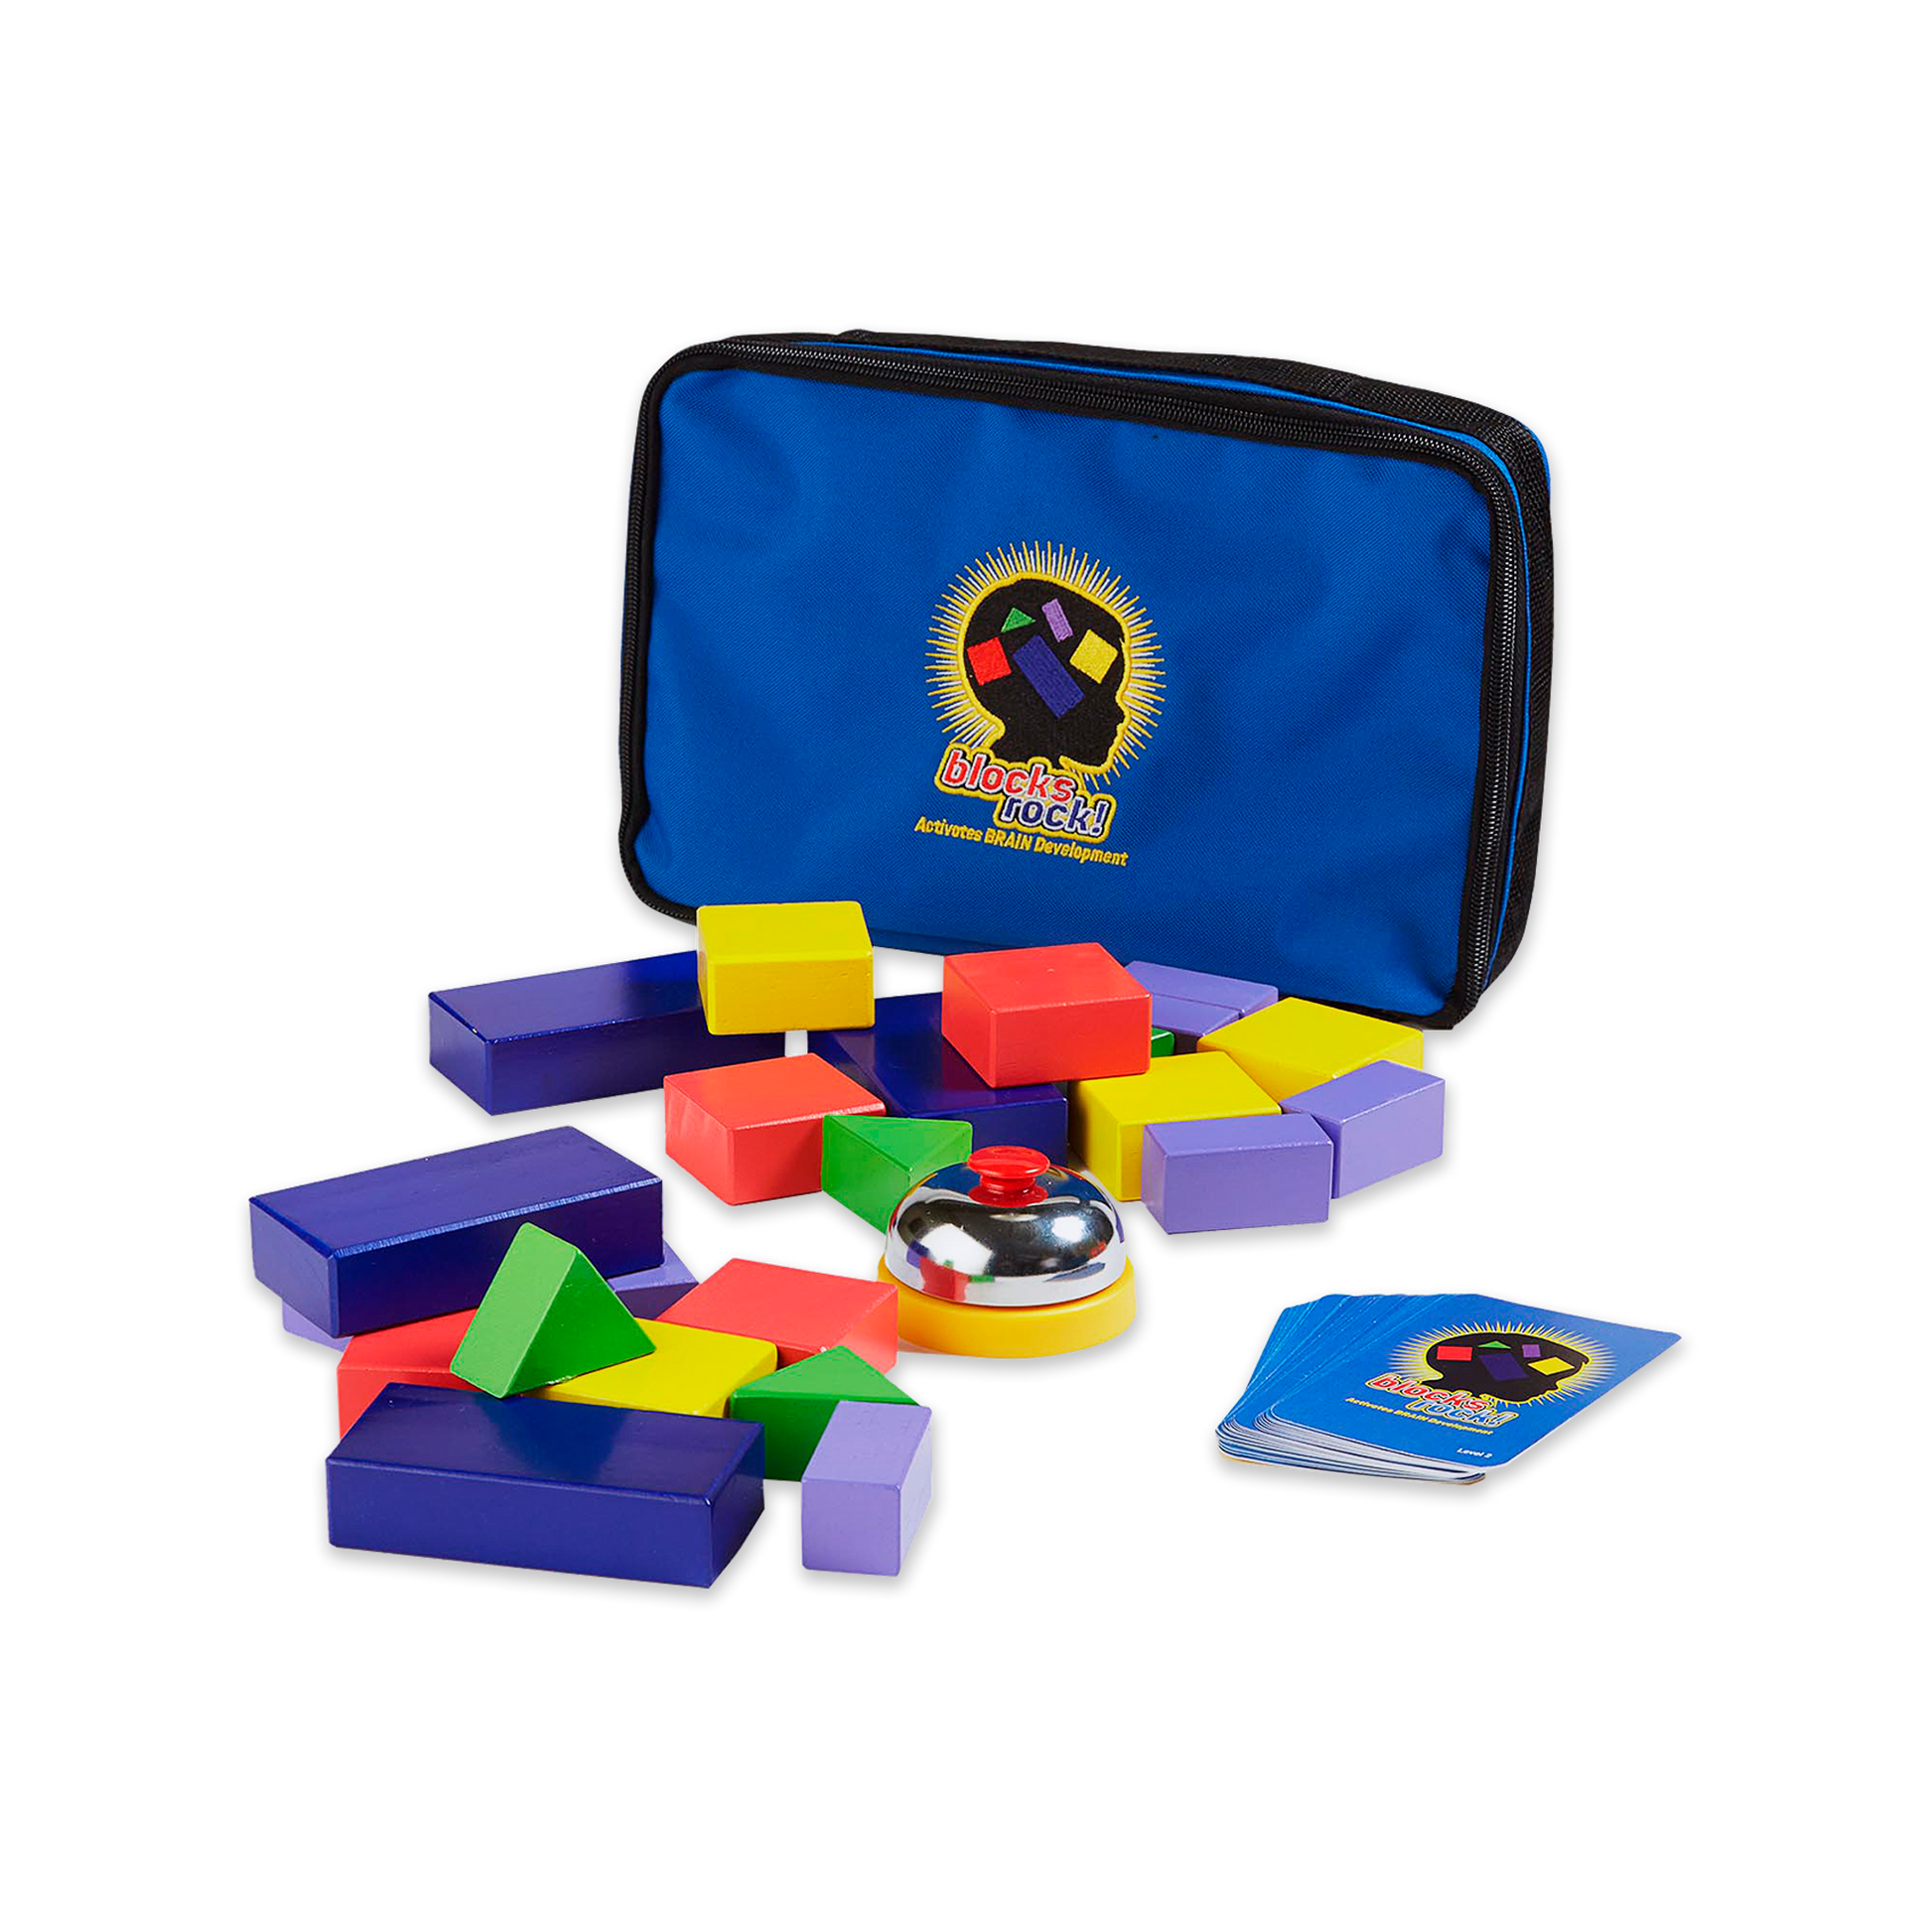 Preview of the Blocks Rock Deluxe Set that includes 24 solid wood blocks, 2 decks of cards, durable carrying case, a bell for gameplay